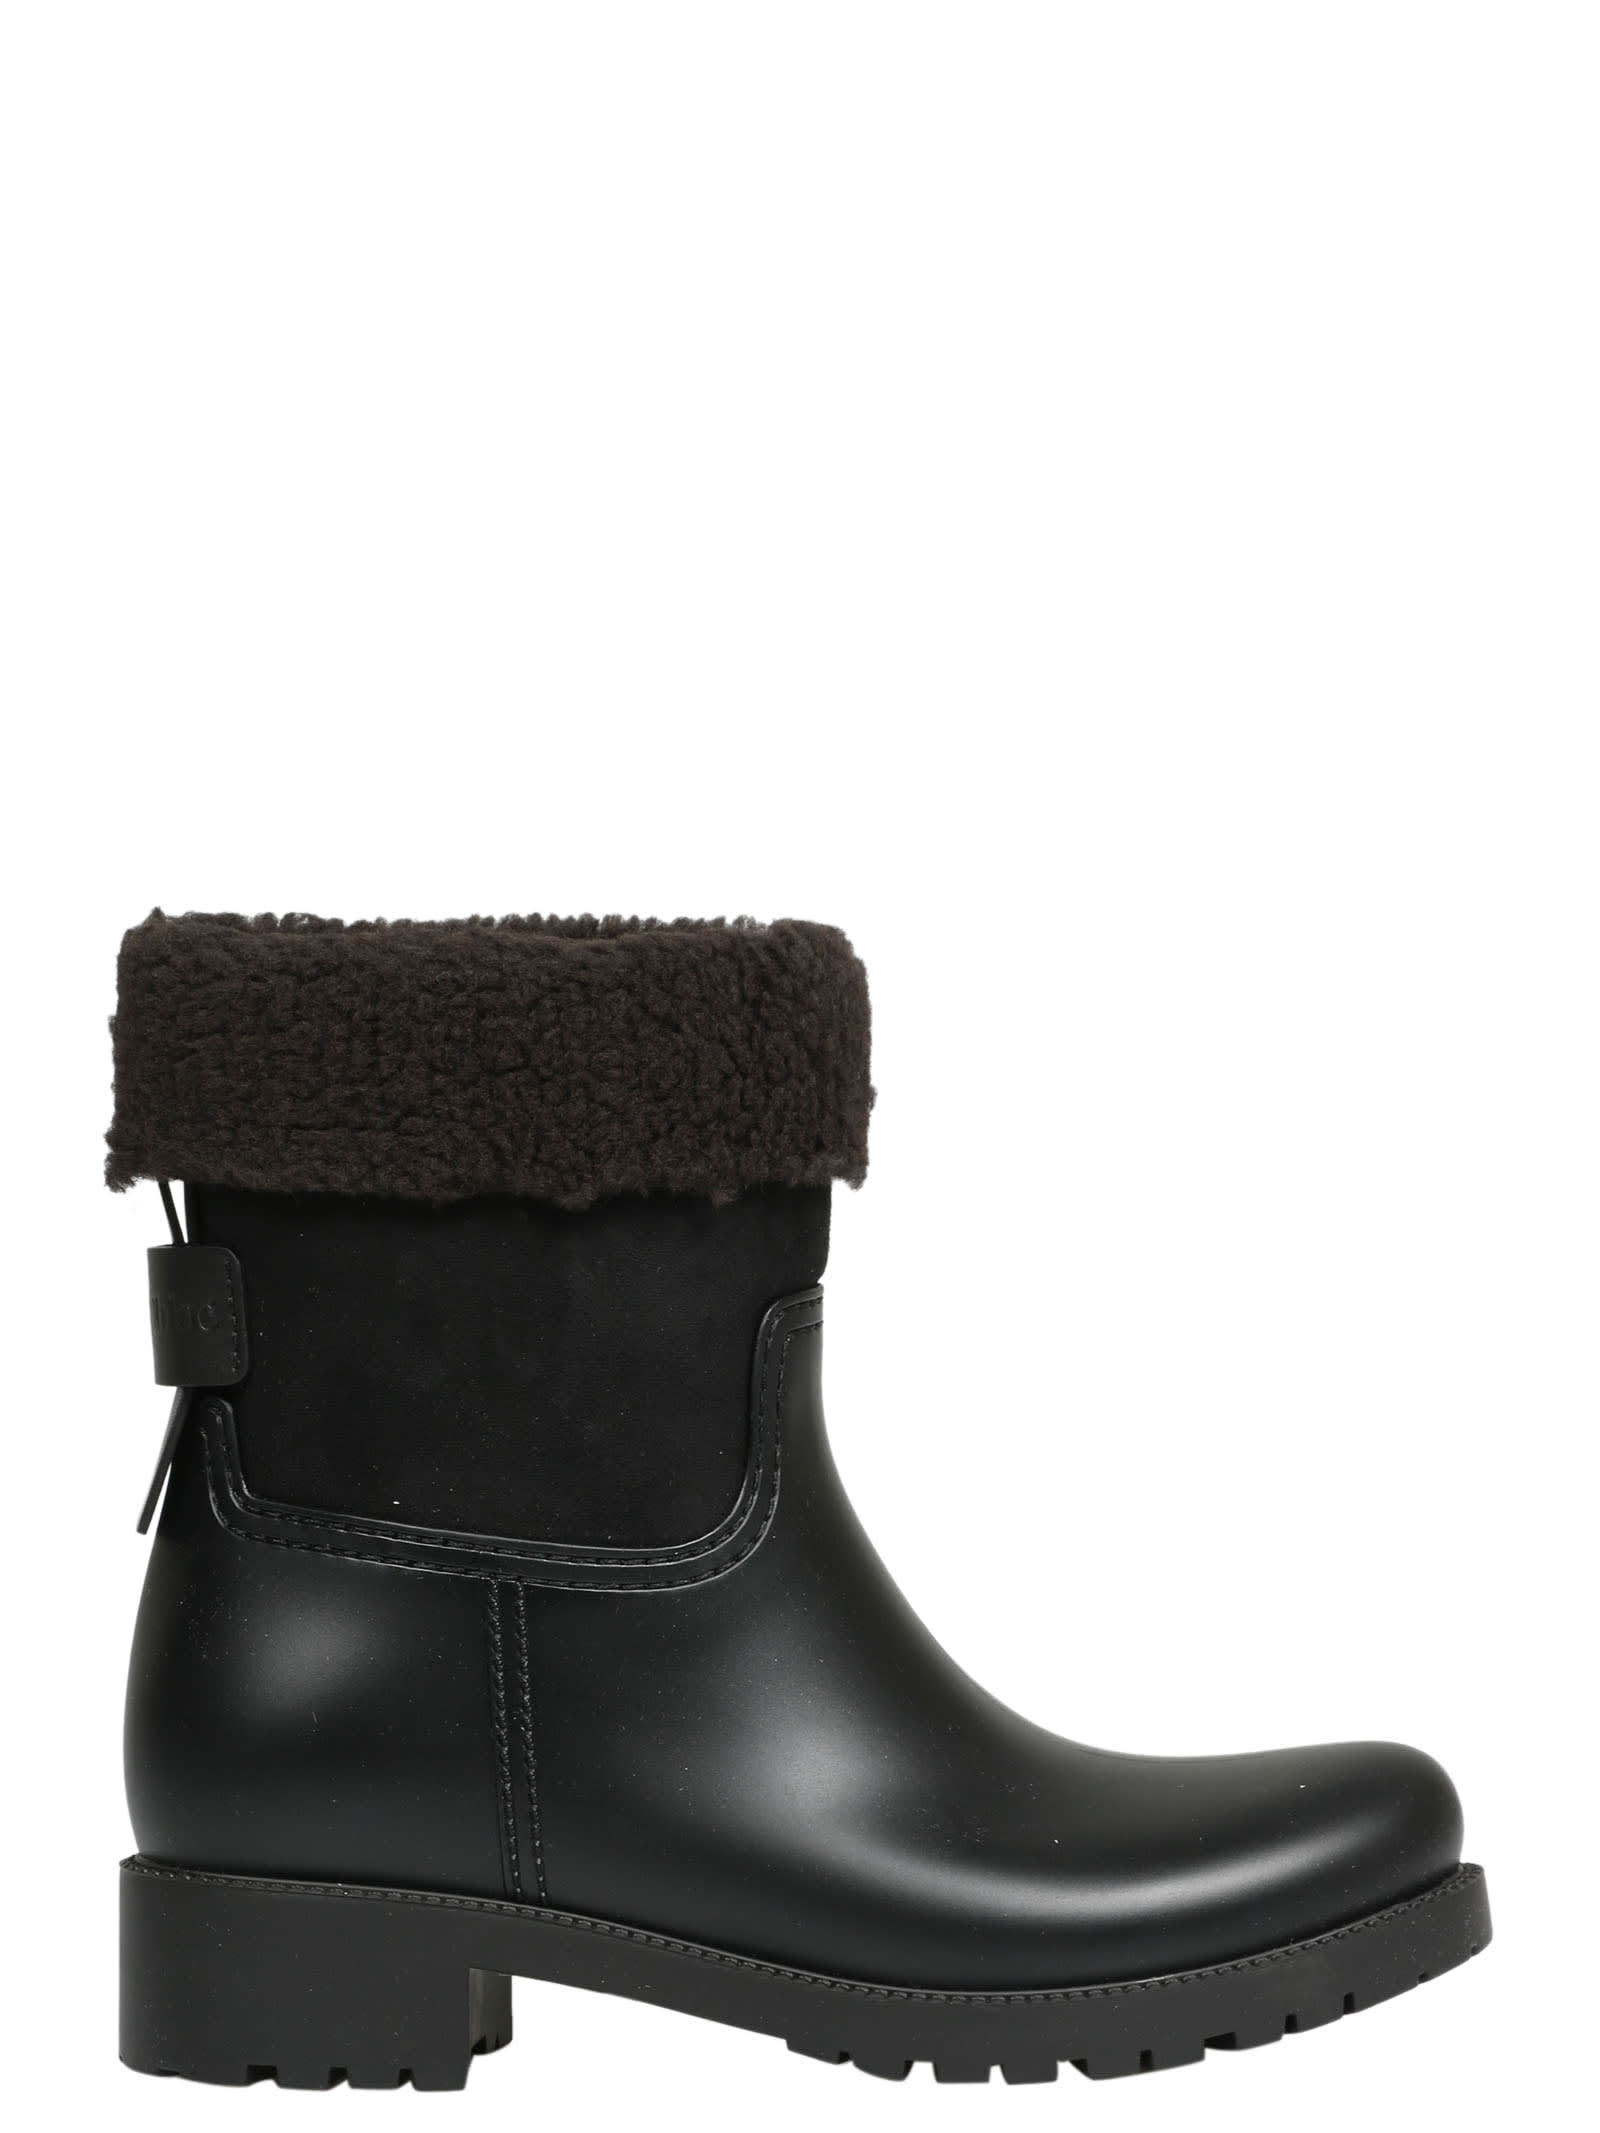 See by Chloé Jannet Ankle Boots